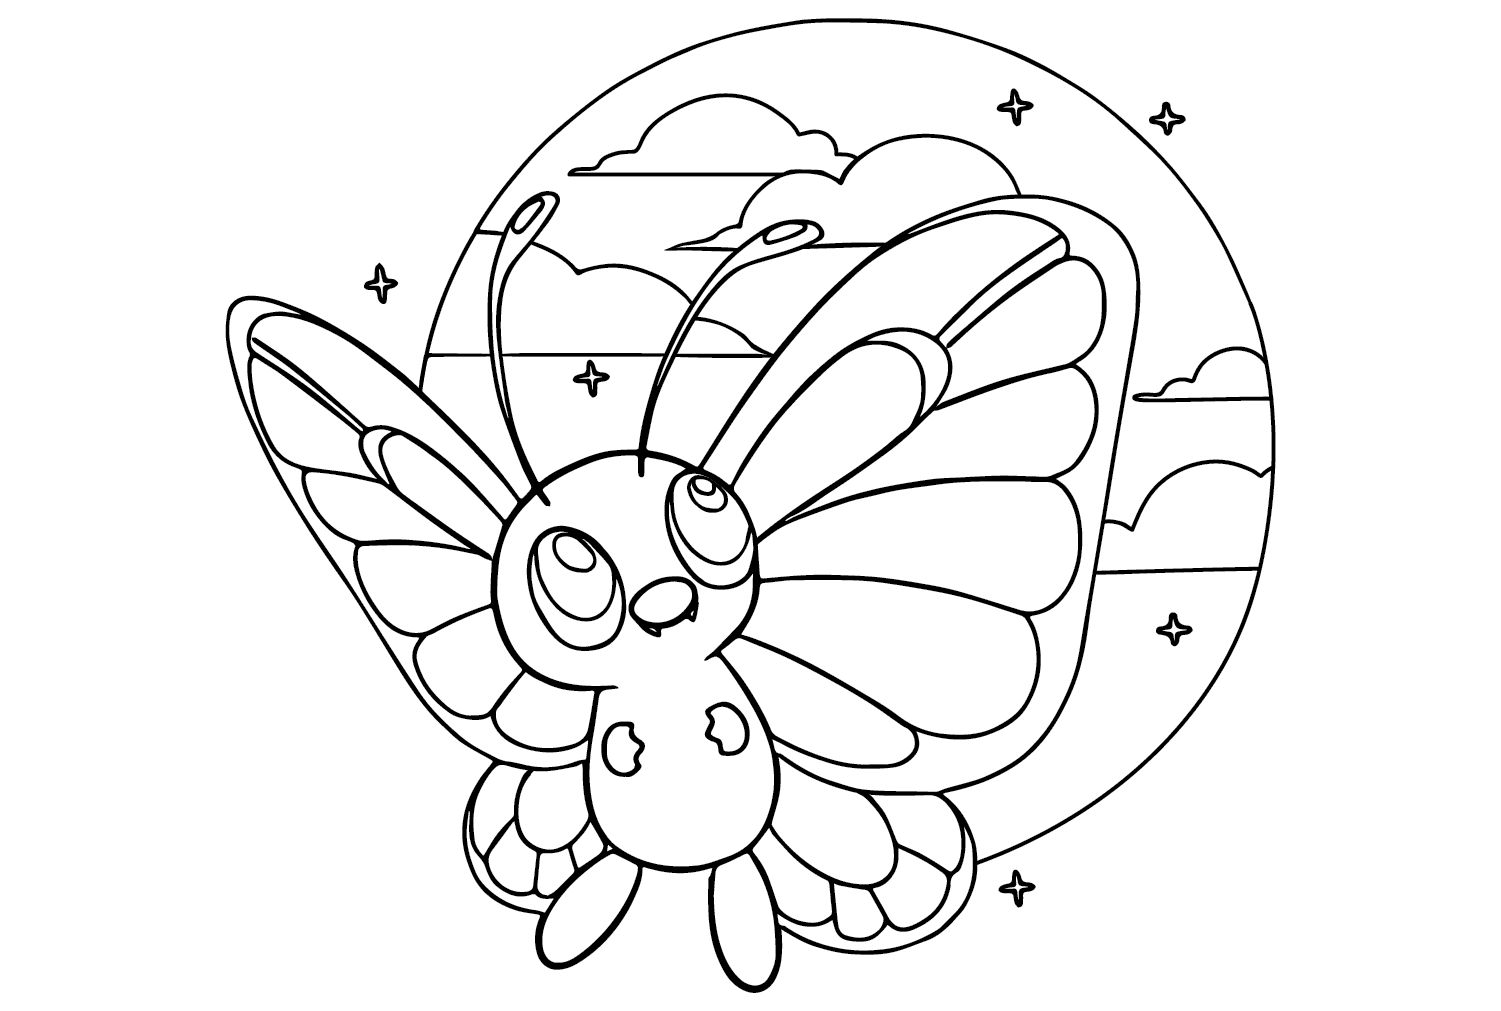 Butterfree Coloring Page from Butterfree